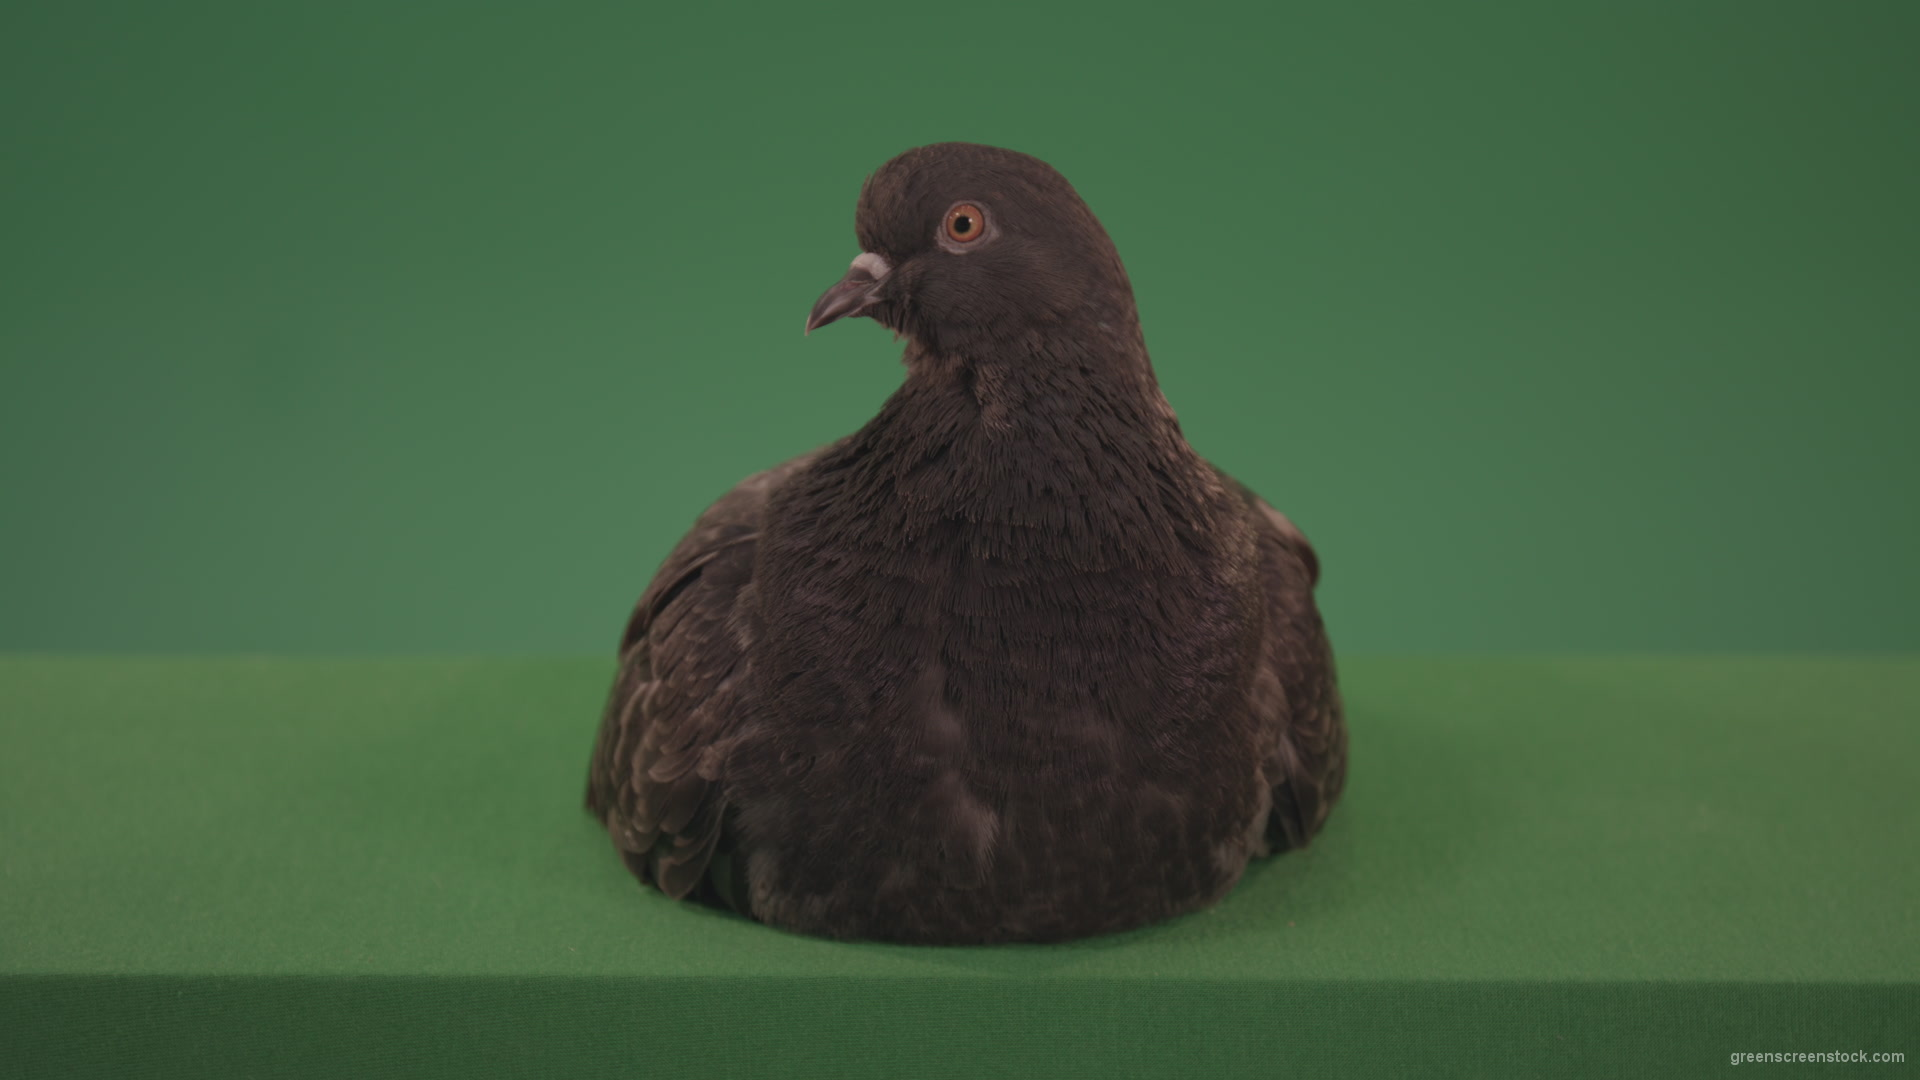 Bird-has-settled-on-the-ground-and-sits-a-dove-of-gray-color-isolated-on-chromakey-background_007 Green Screen Stock